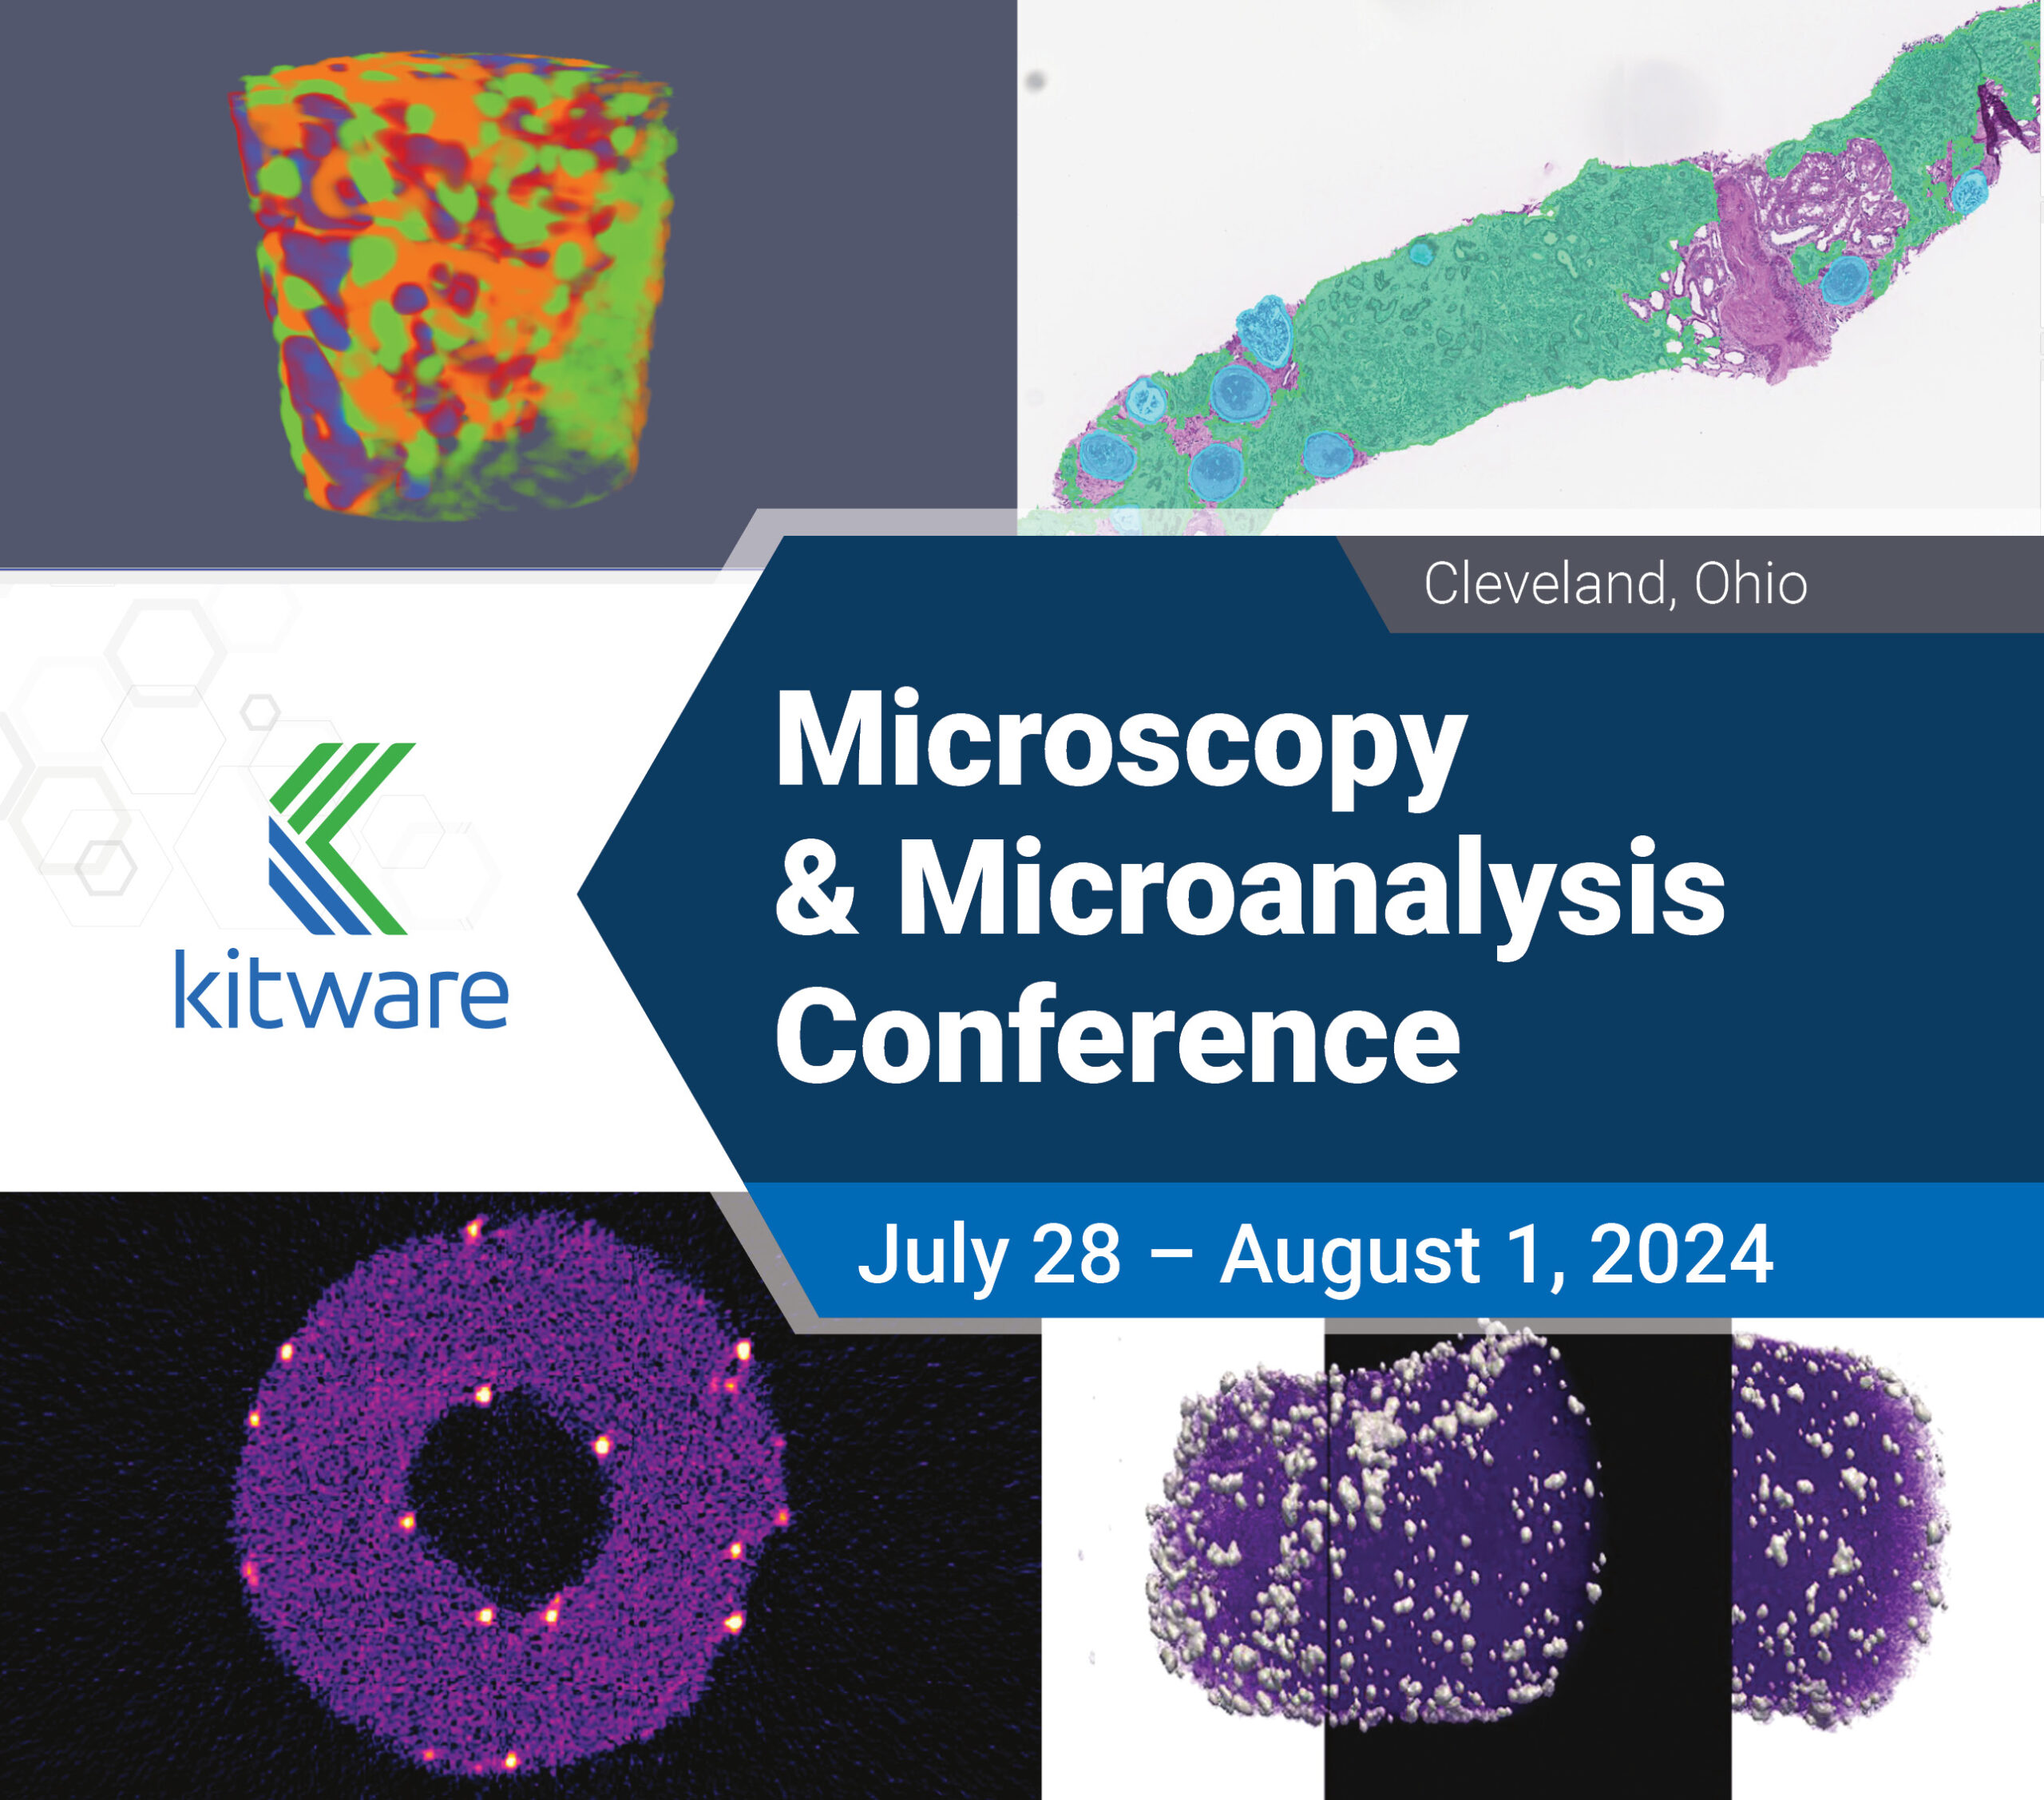 Microscopy & Microanalysis Conference. July 28 - August 1, 2024.